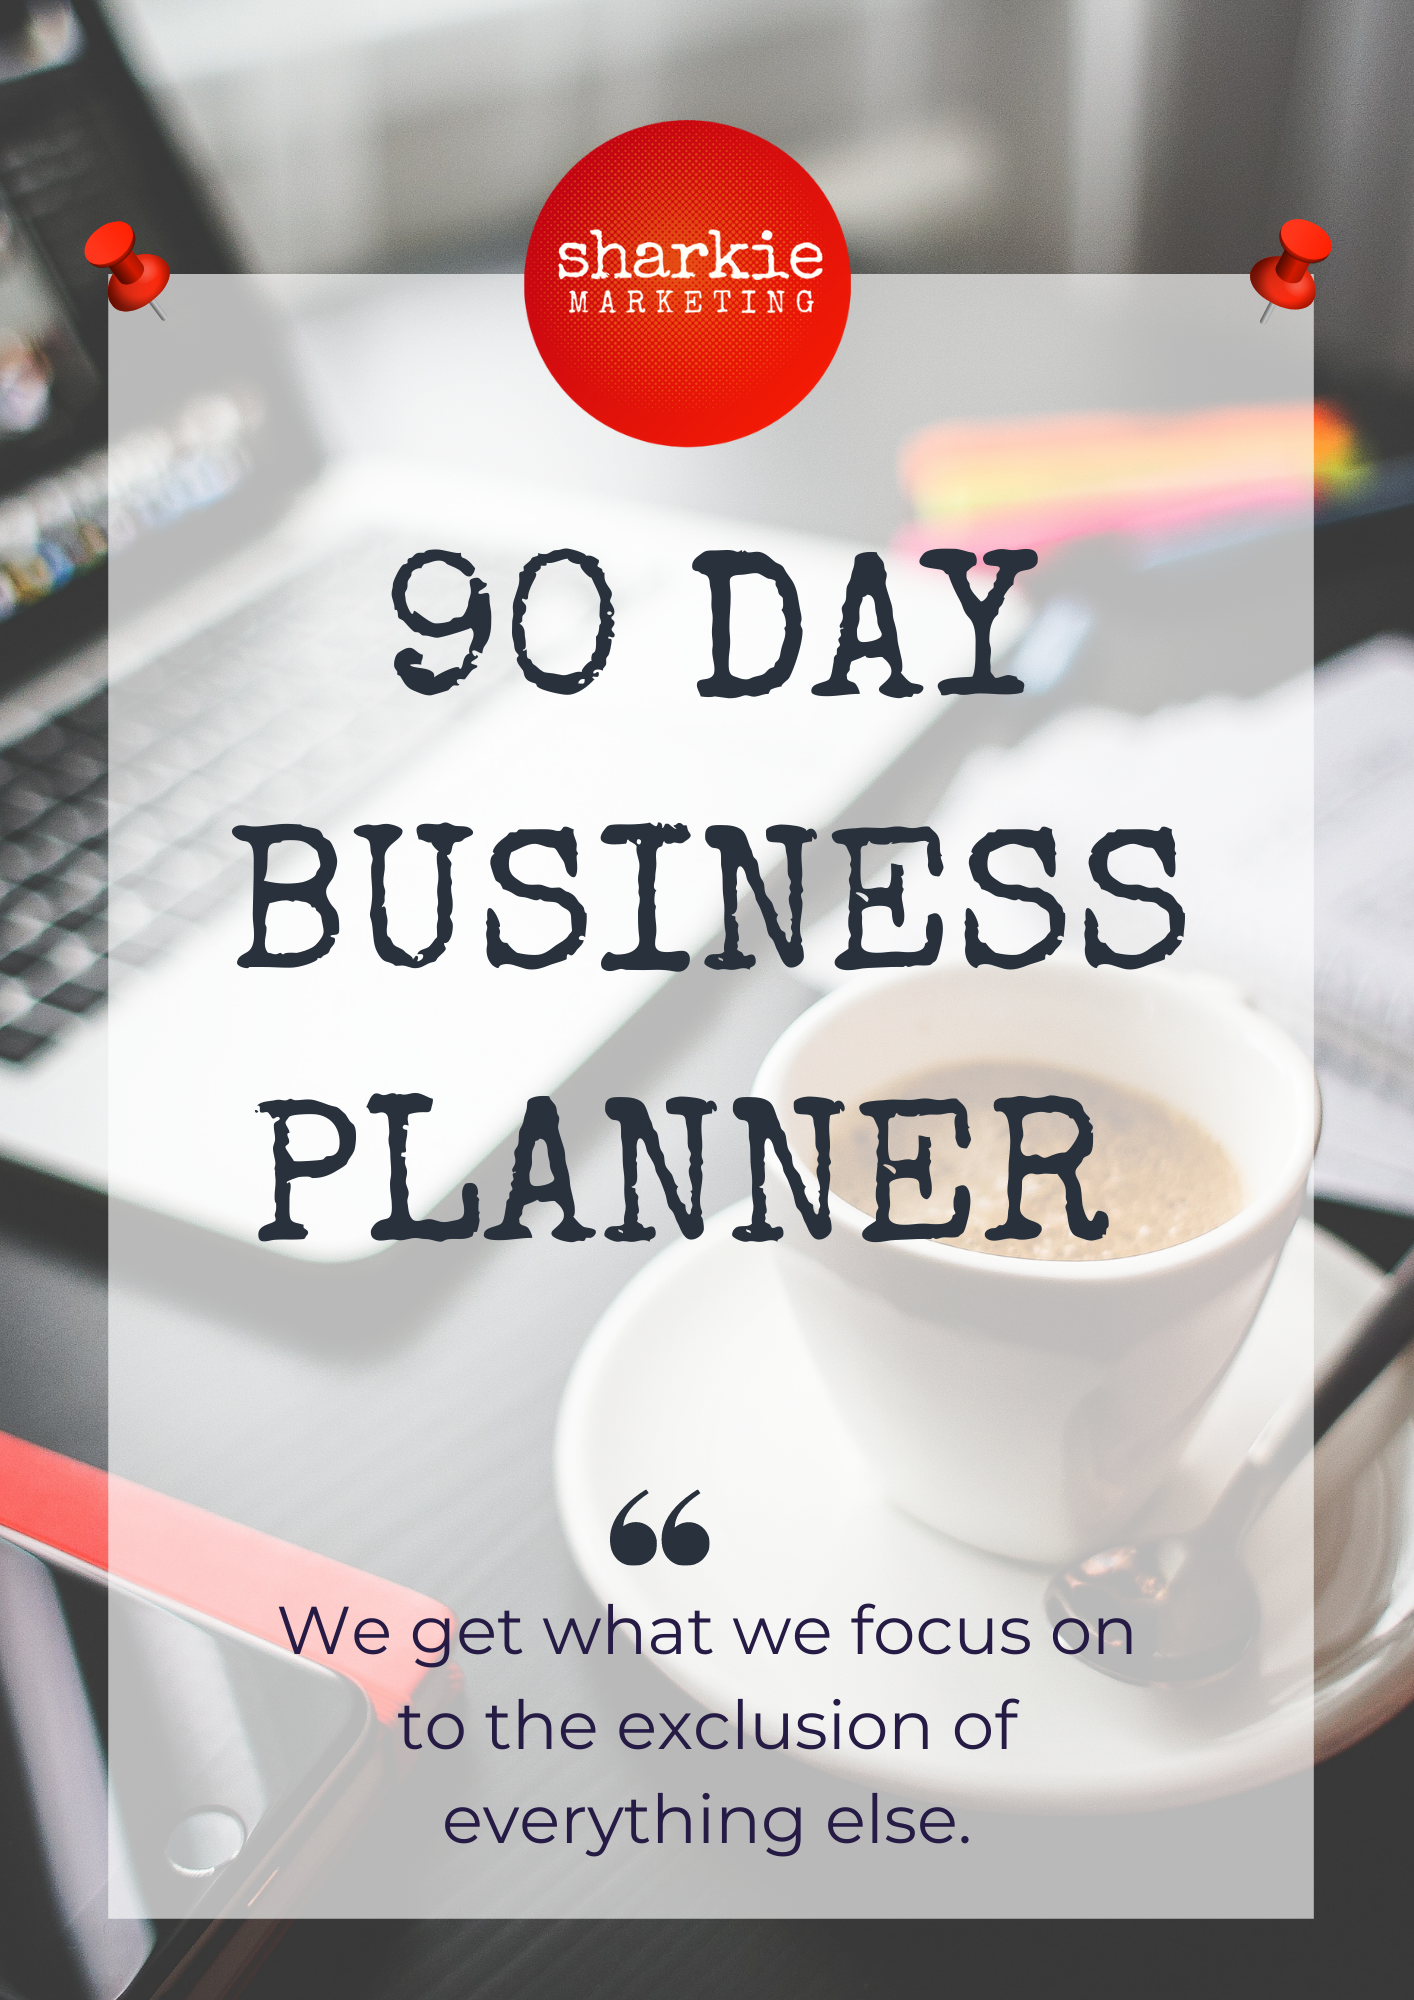 The 90 Day Business Planner undated